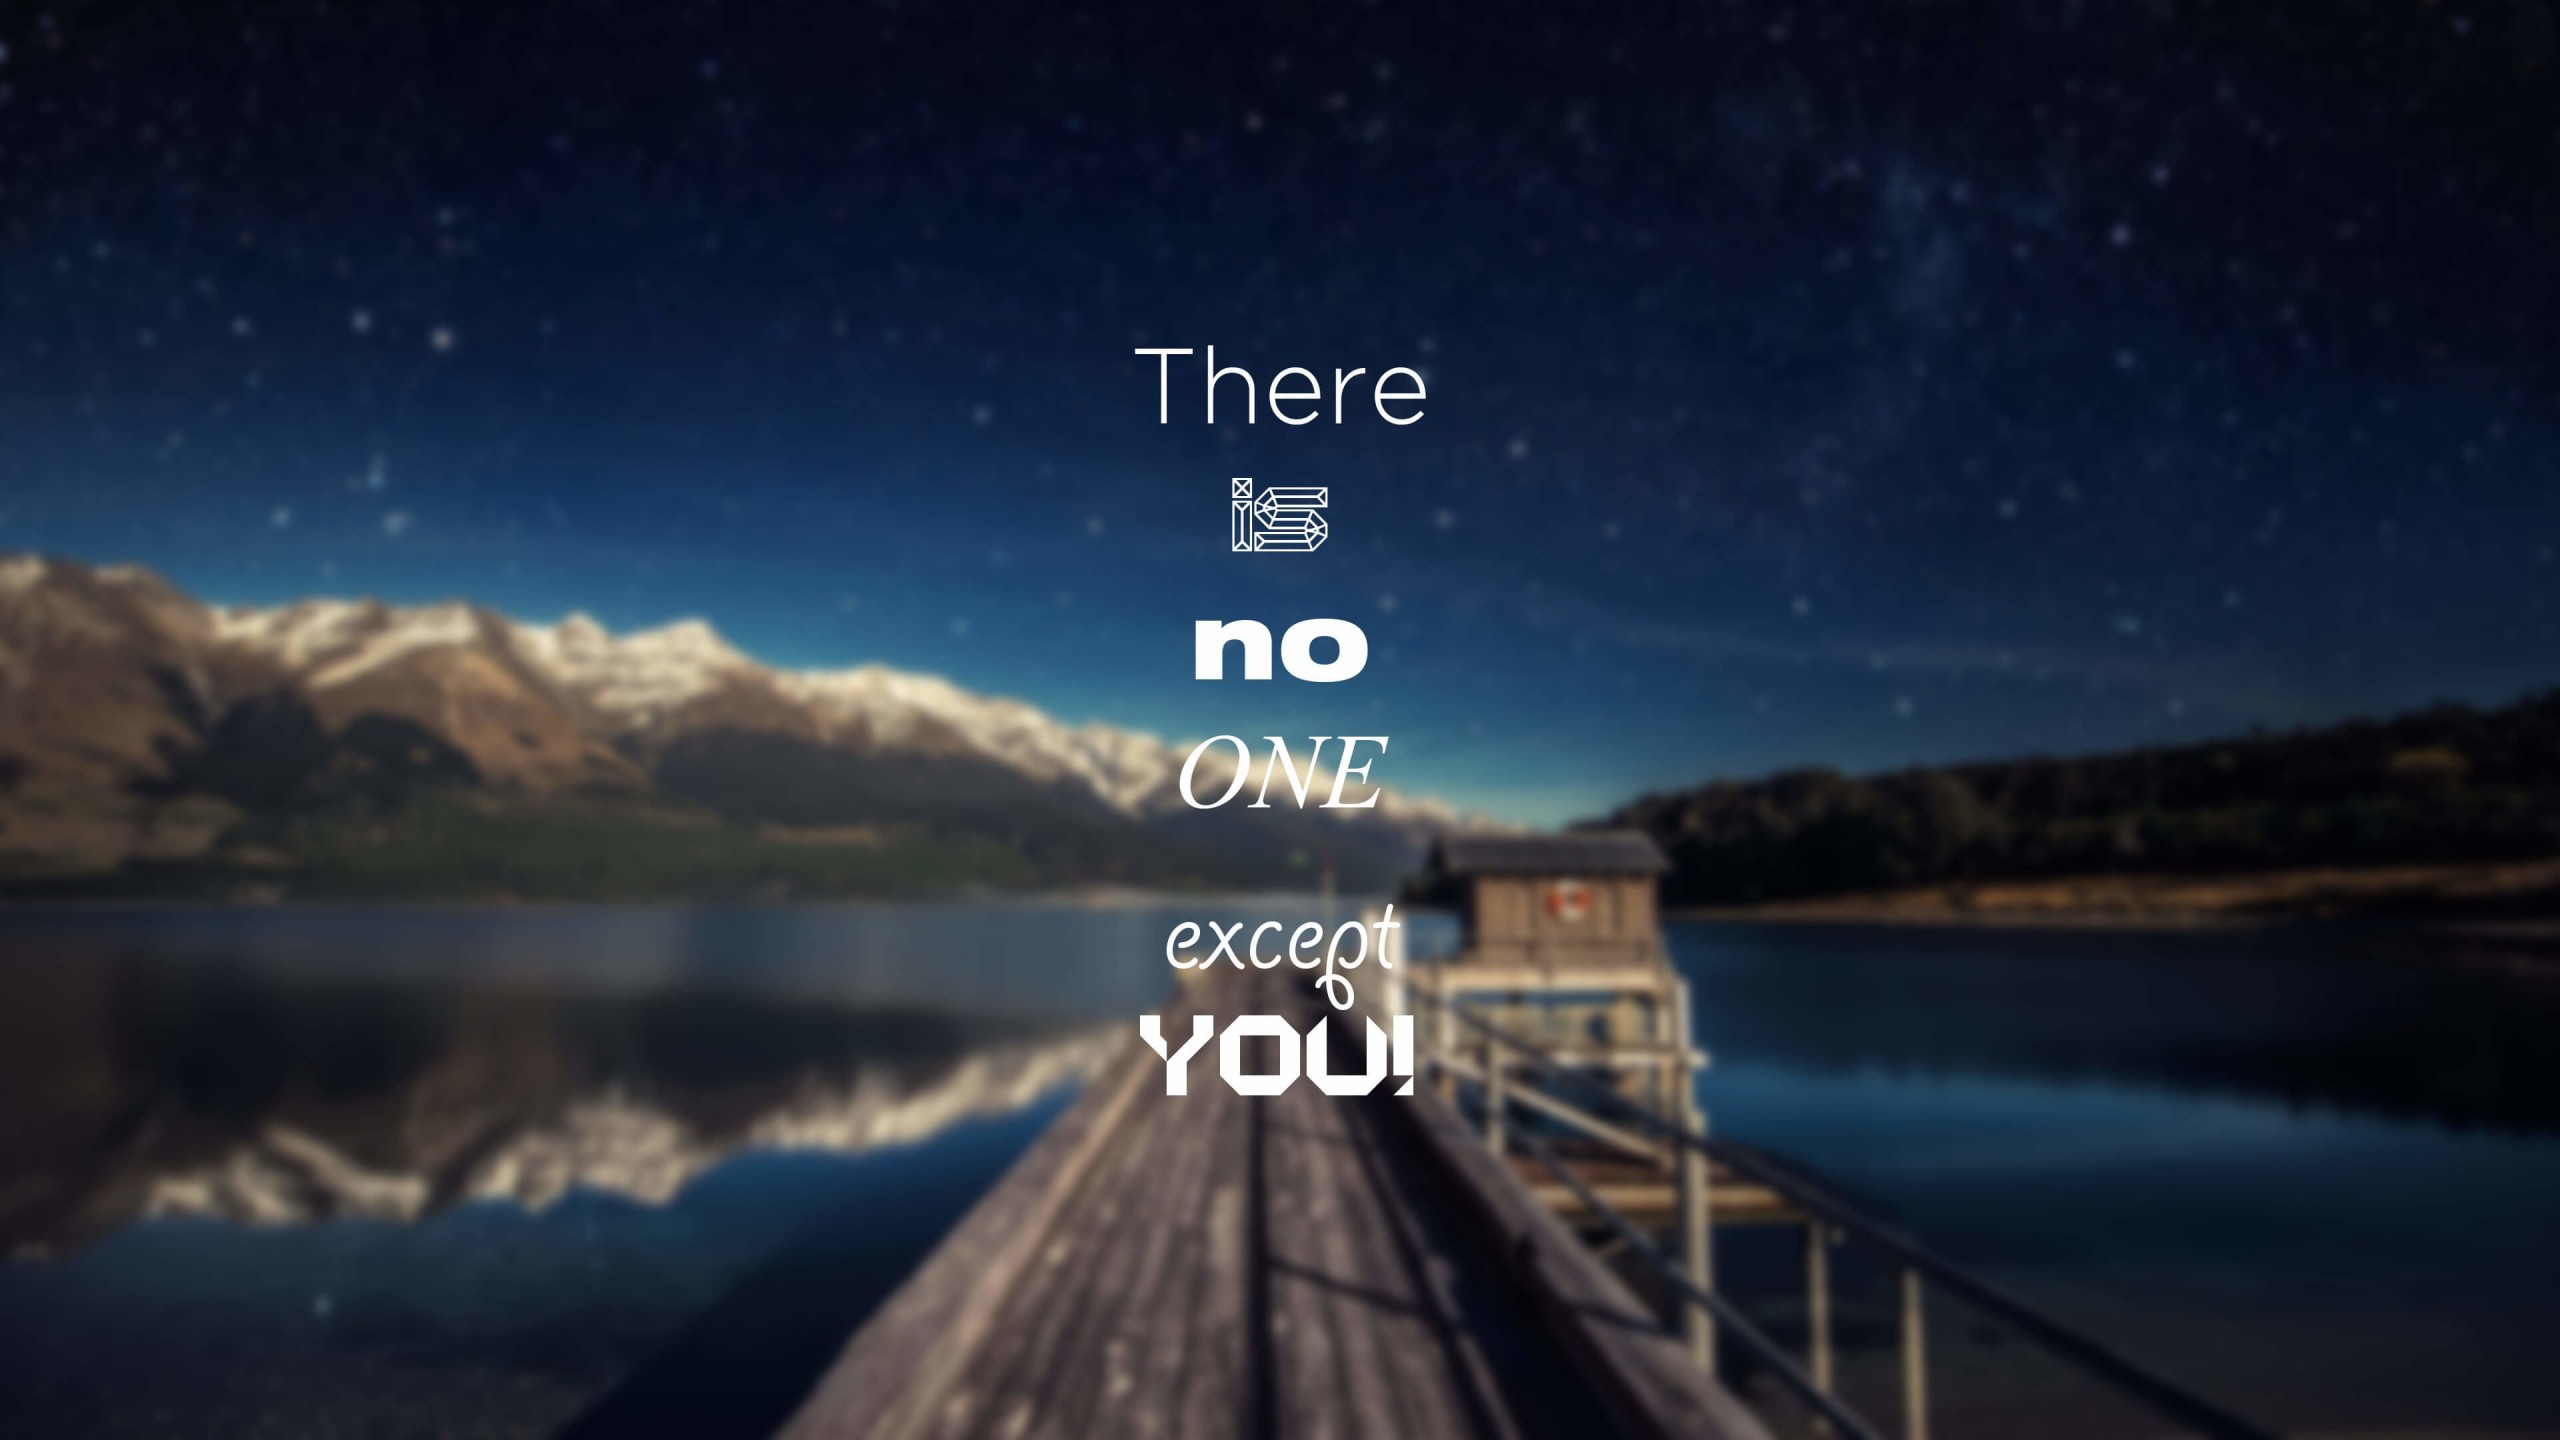 There Is No One Except You Wallpaper for Social Media YouTube Channel Art